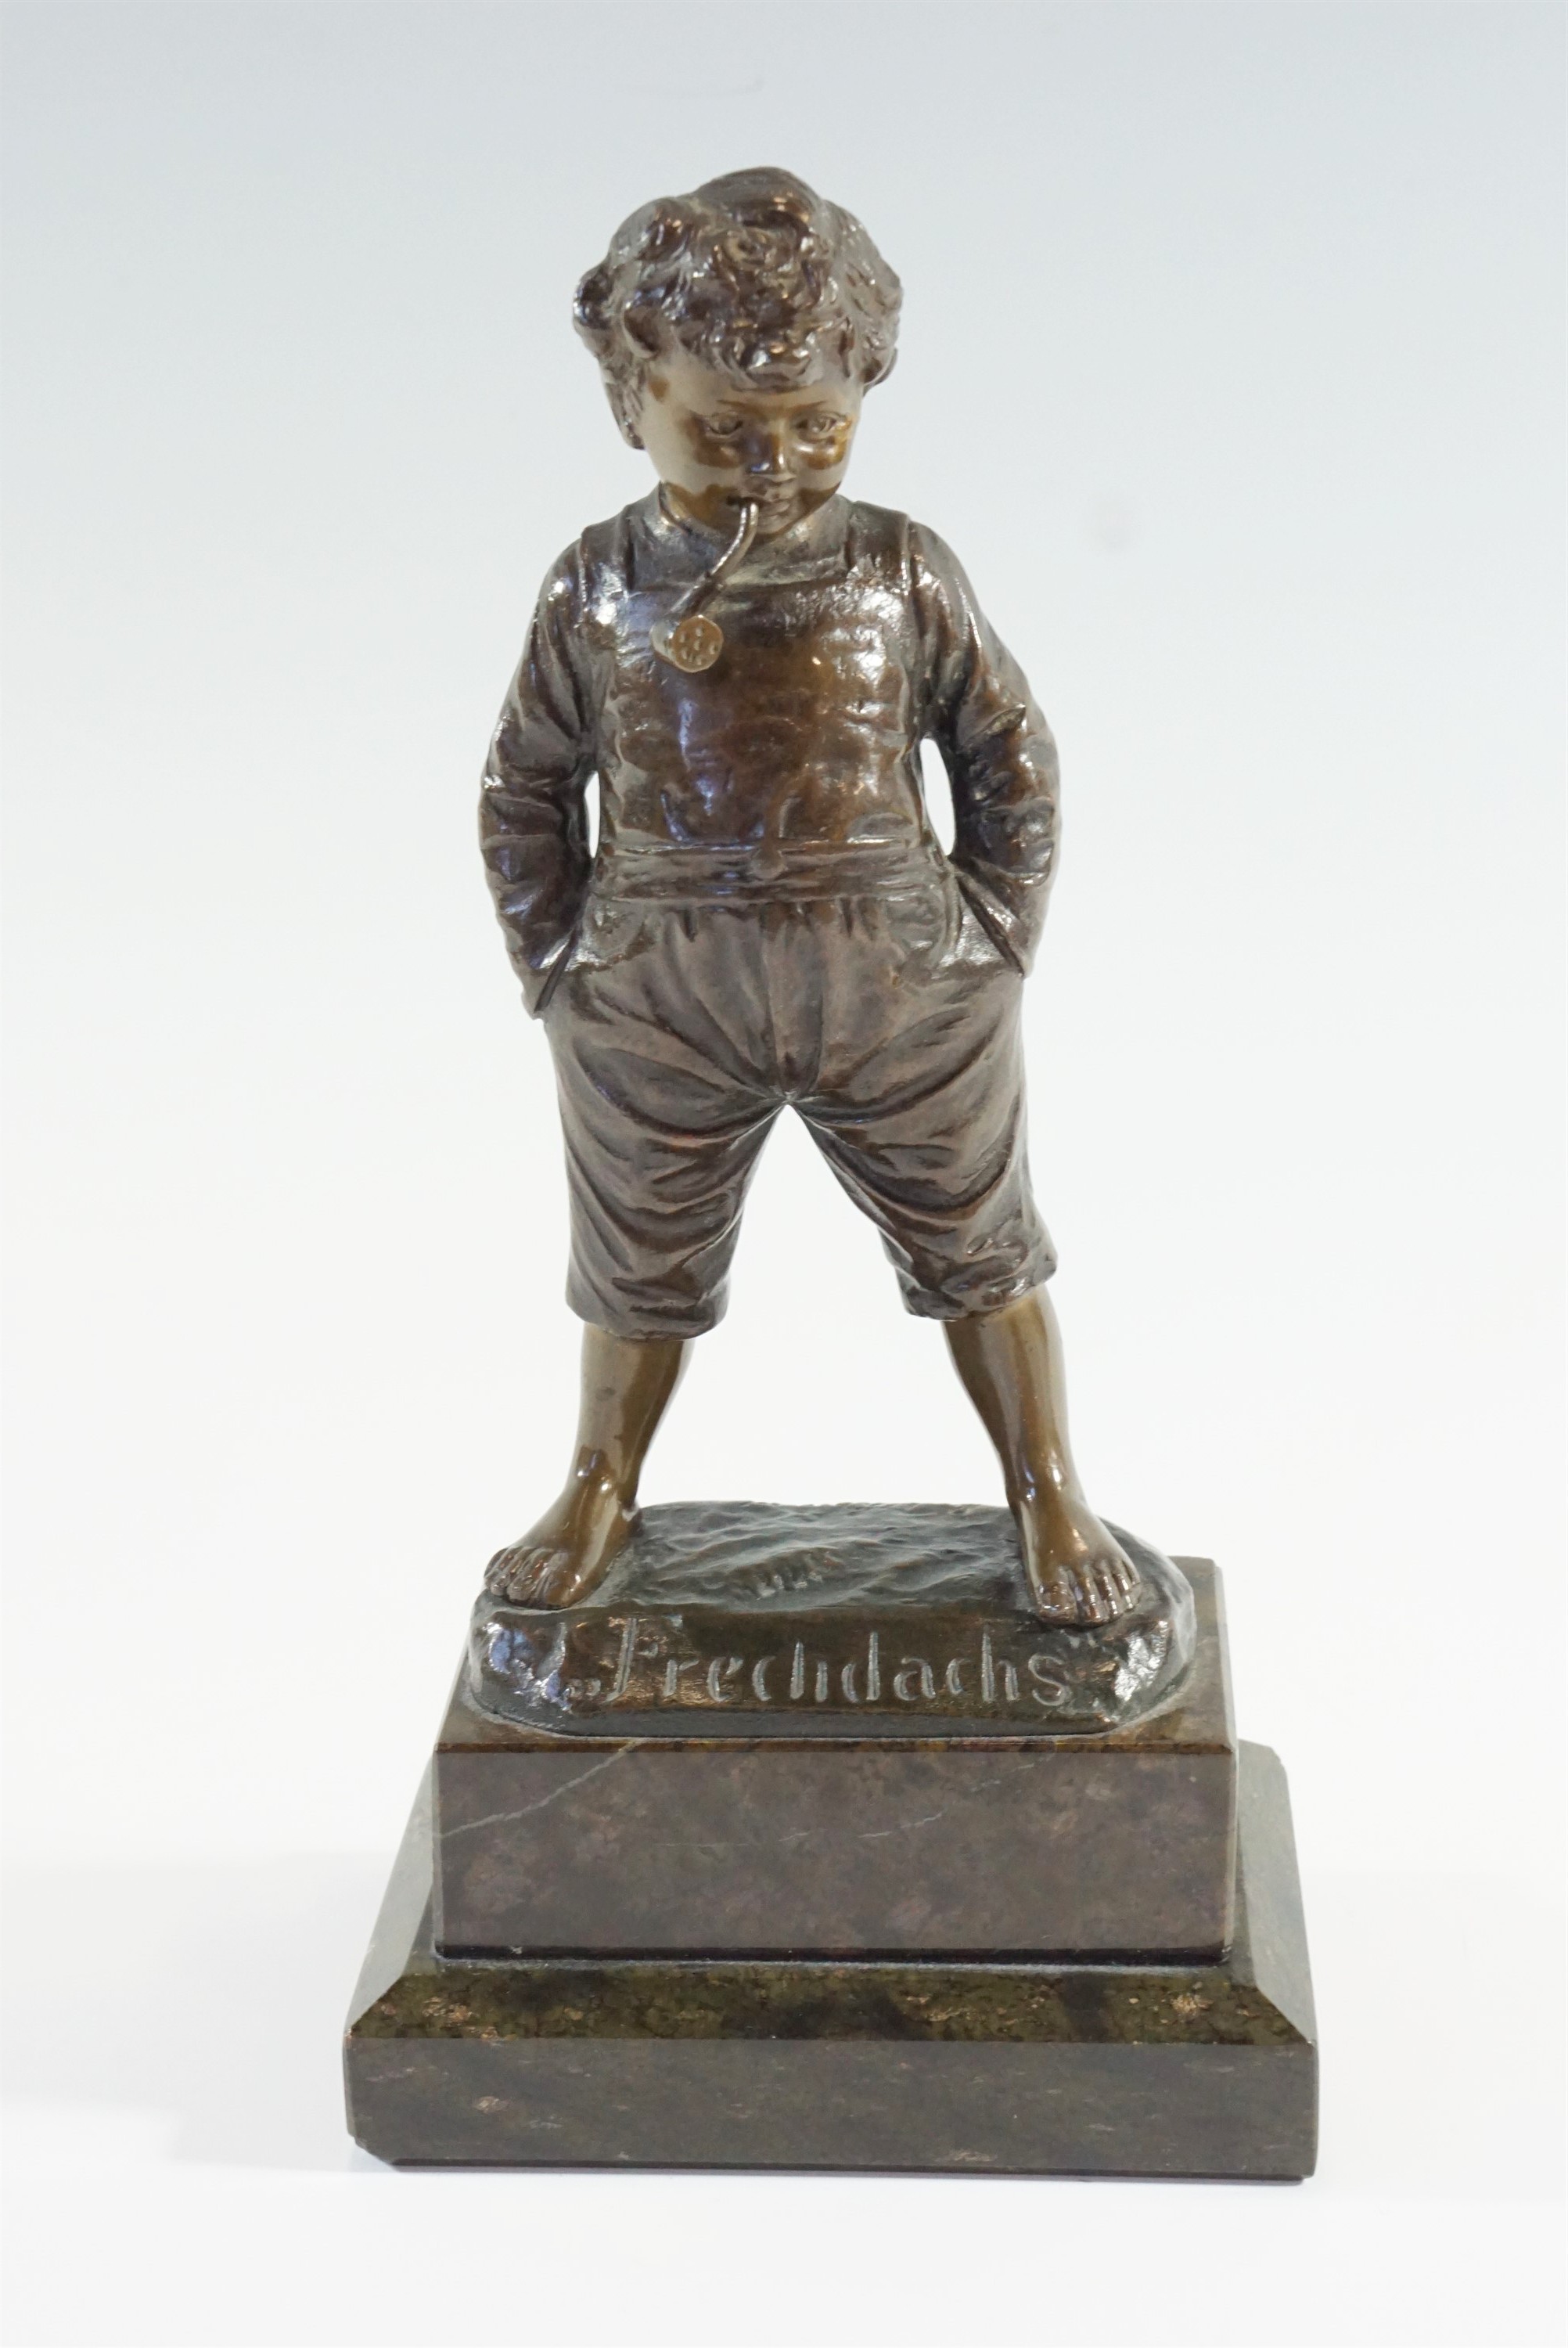 After R Hobold (German, 19th Century) "Frechdachs", [cheeky monkey], a cast bronze figure of a young